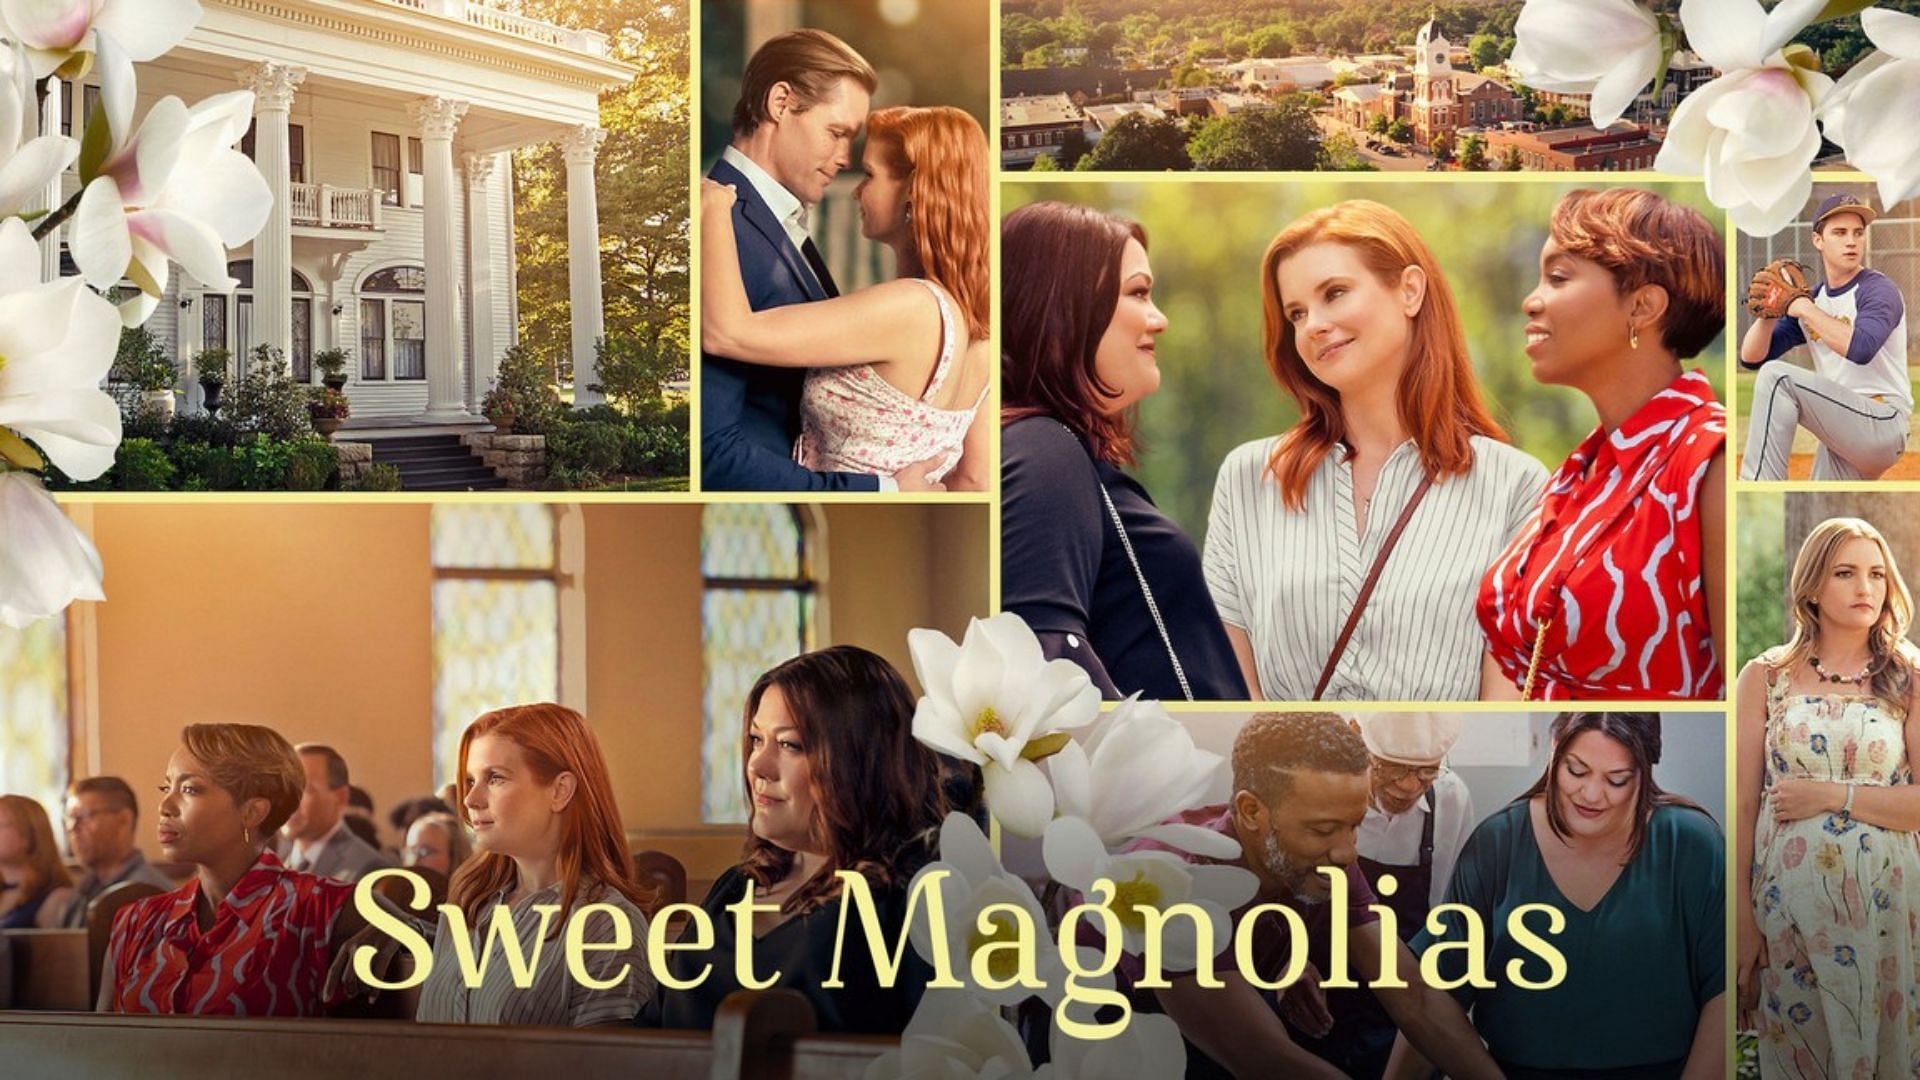 Poster for Sweet Magnolias (Image Via Rotten Tomamtoes)